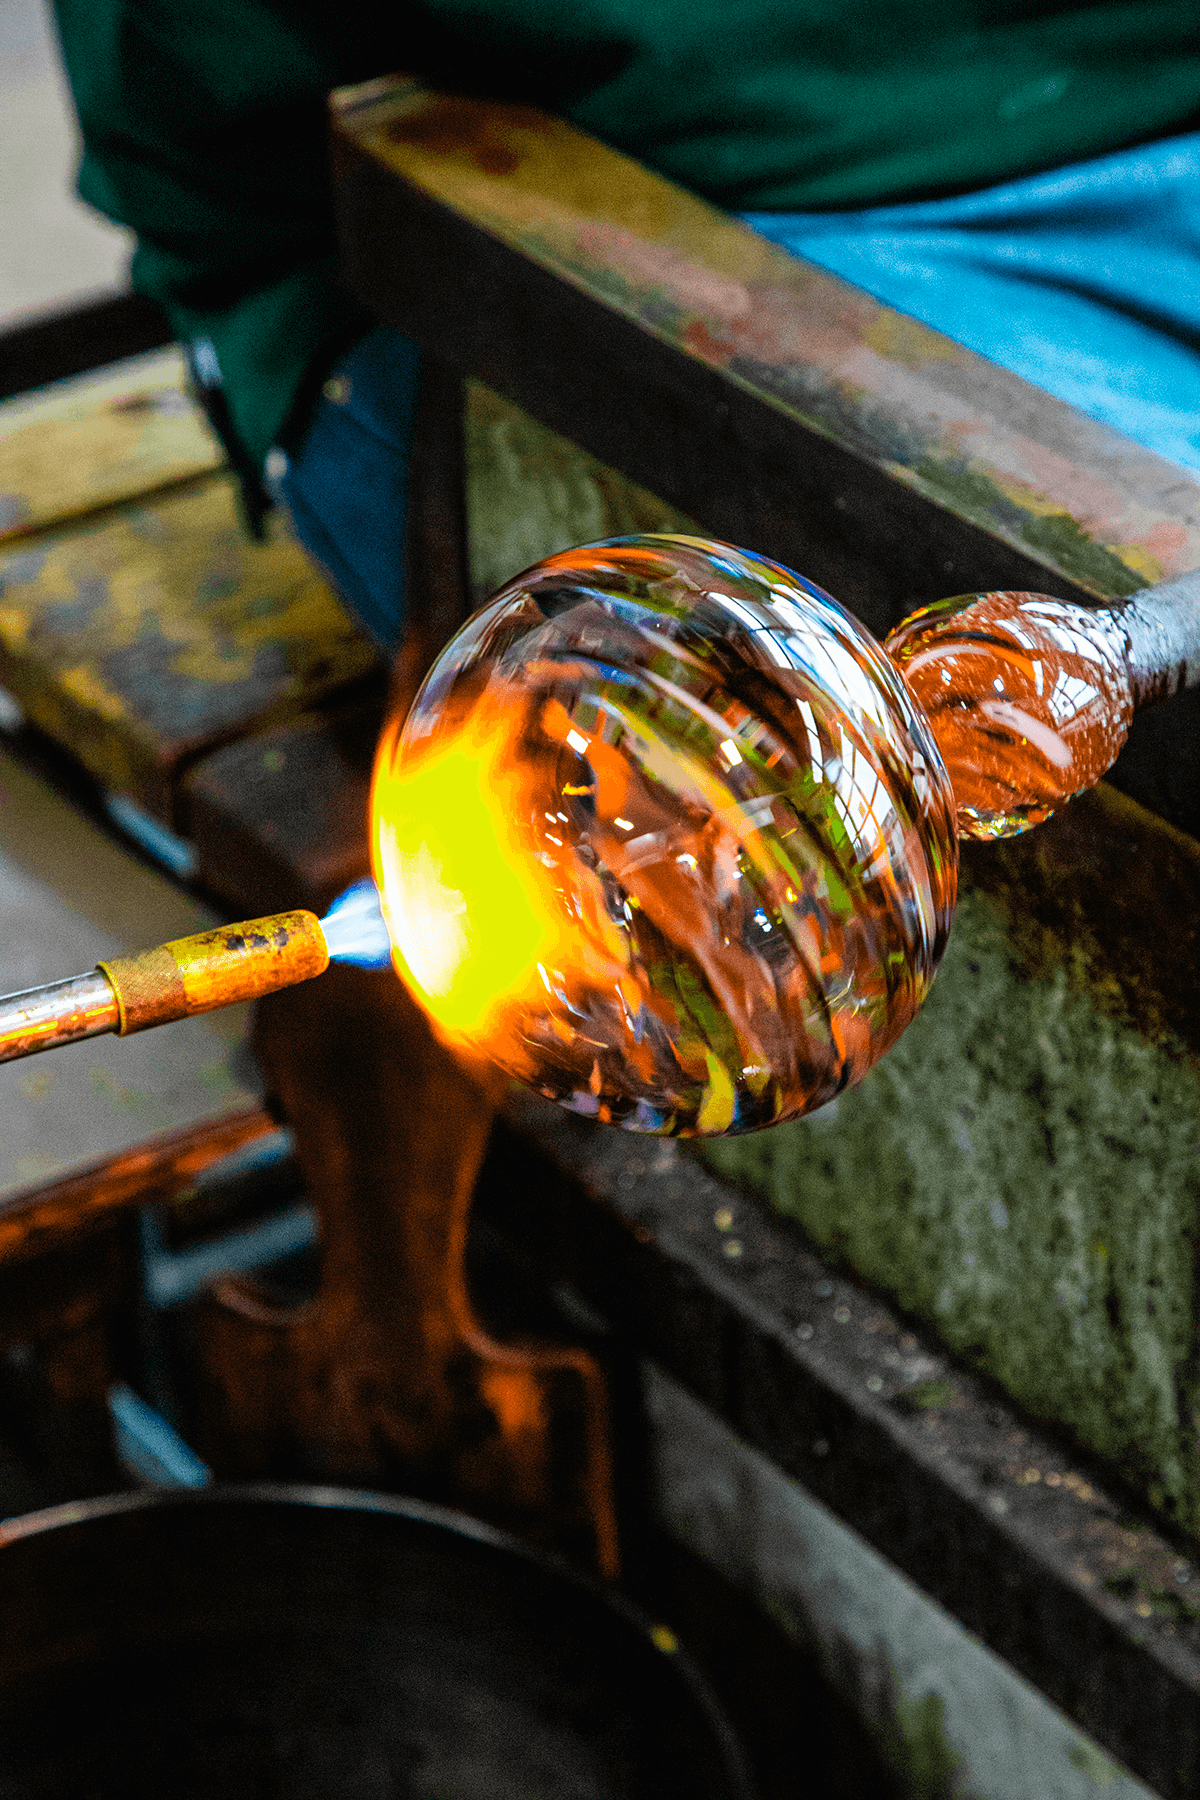 Glassblowing at Tacoma Glassblowing Studio.